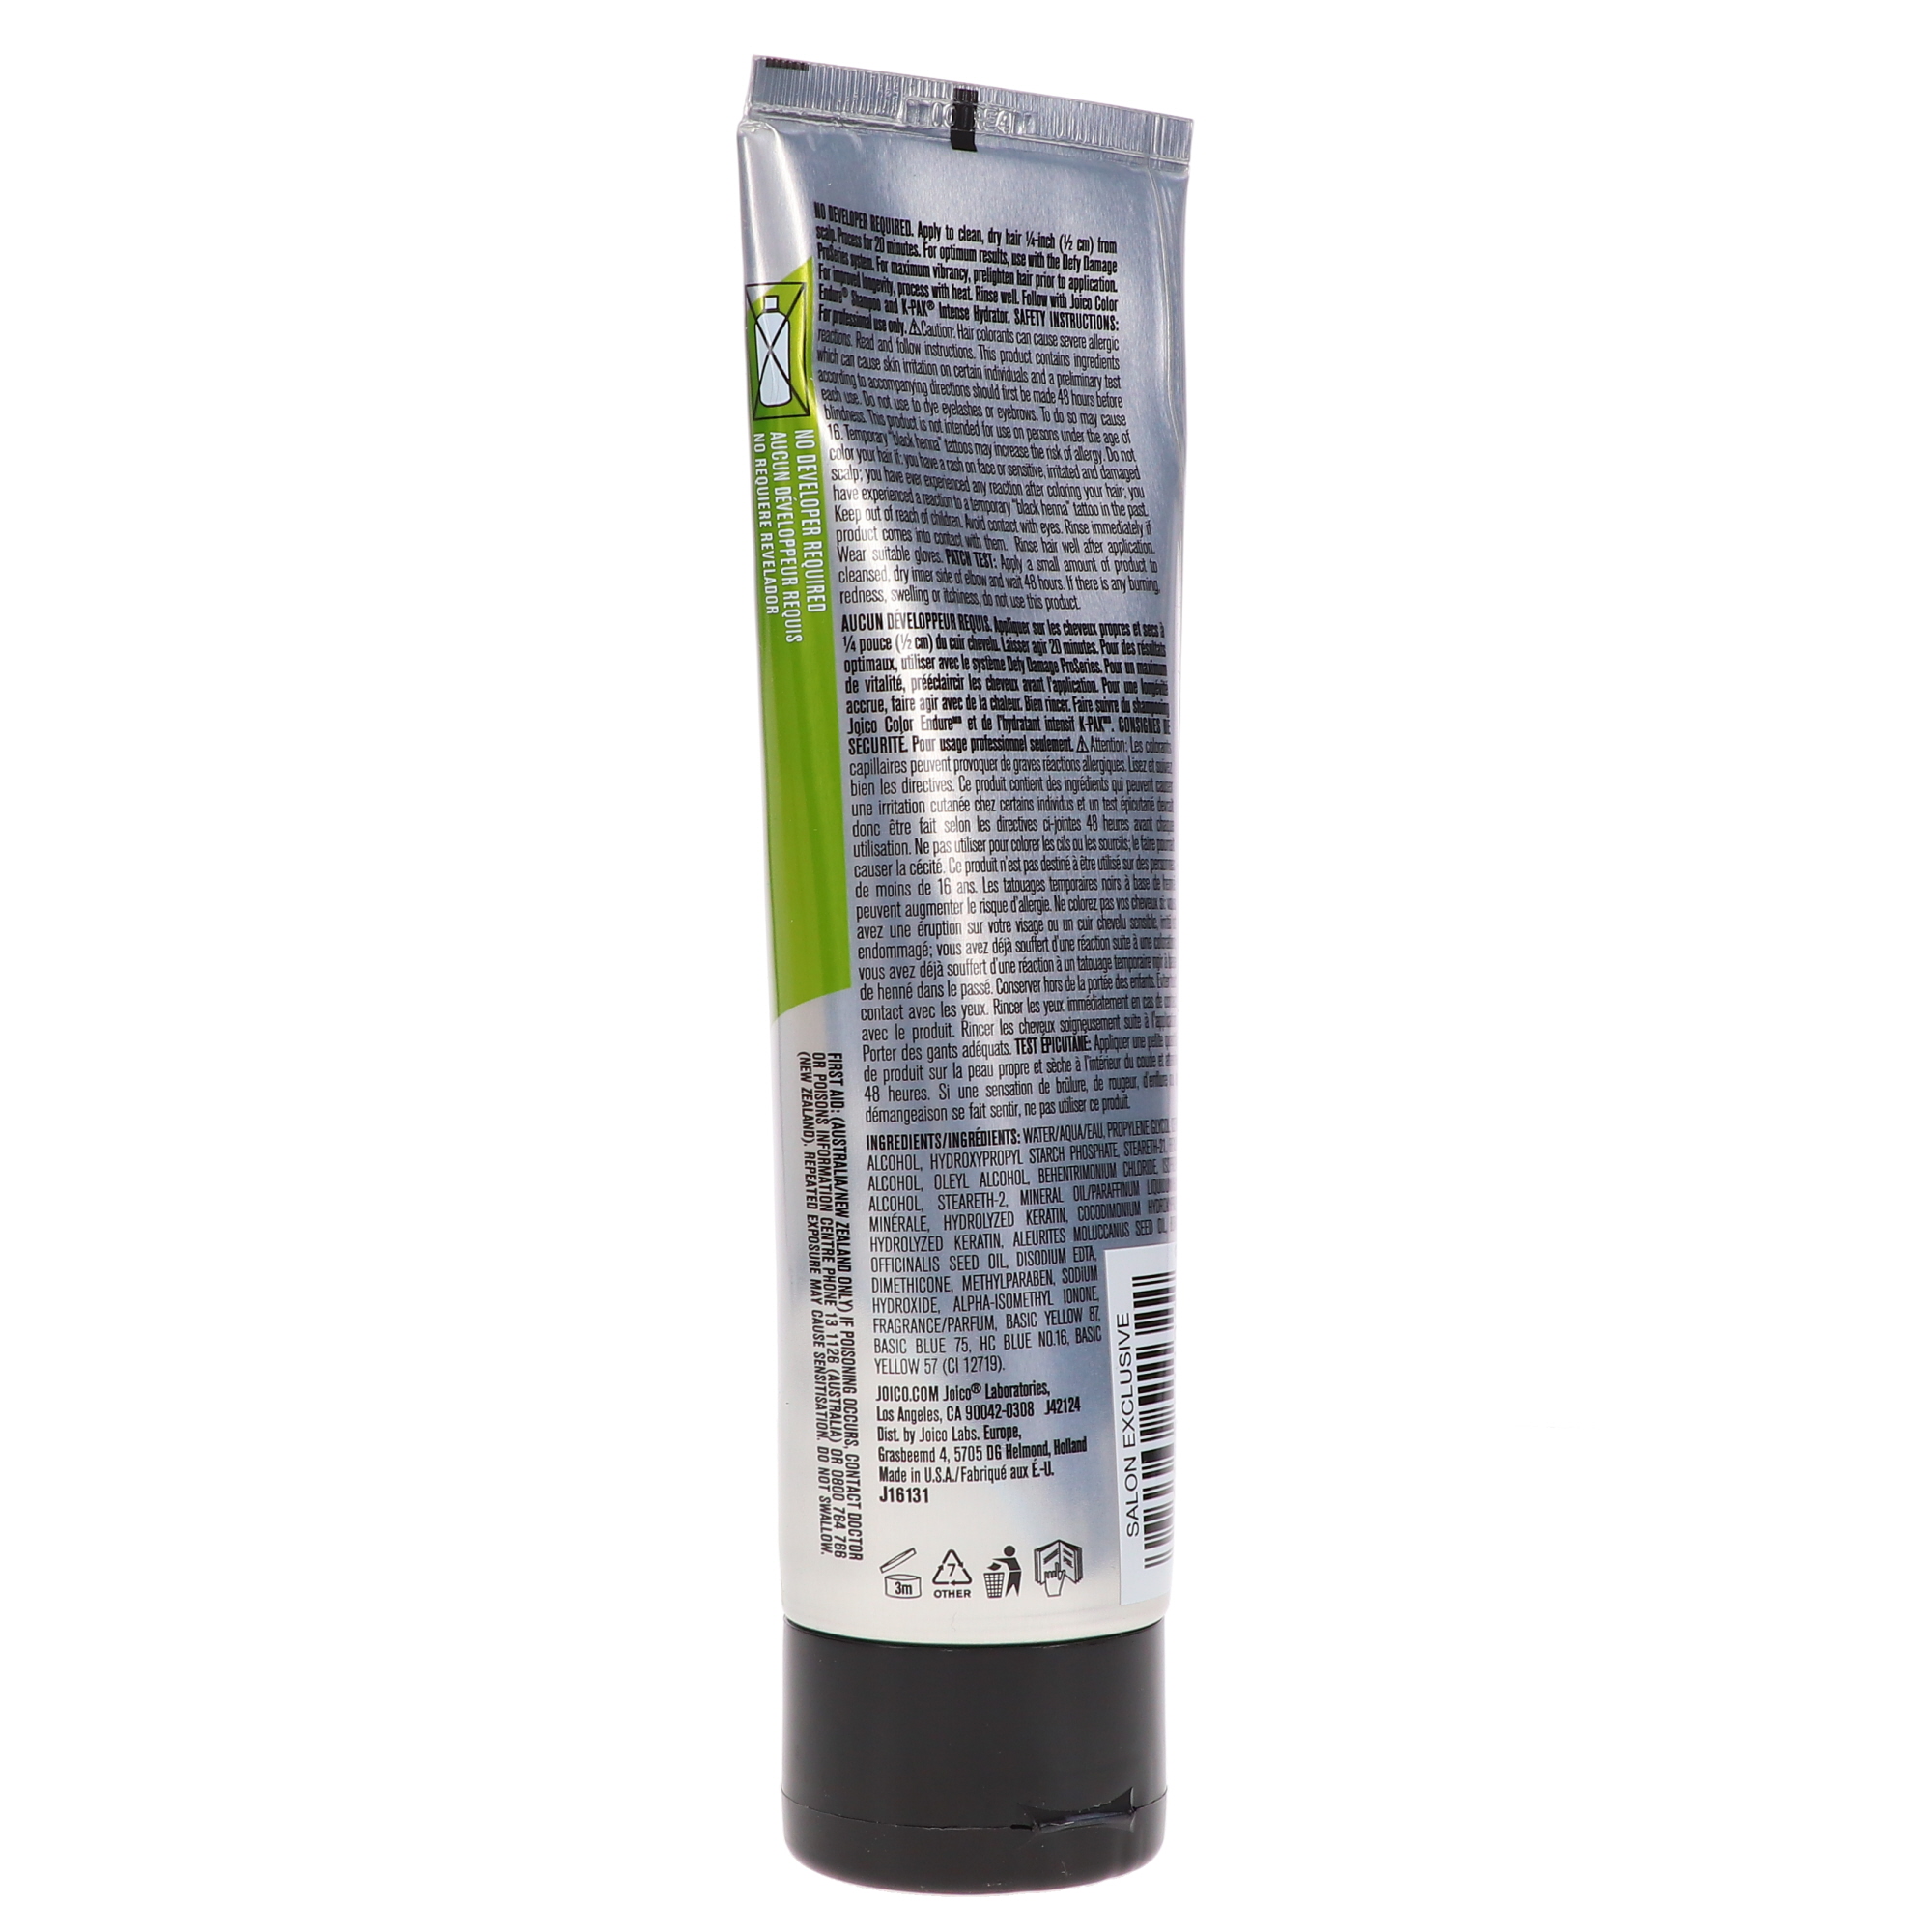 Joico Color Intensity Semi Permanent Shade Limelight 4 oz - image 4 of 8